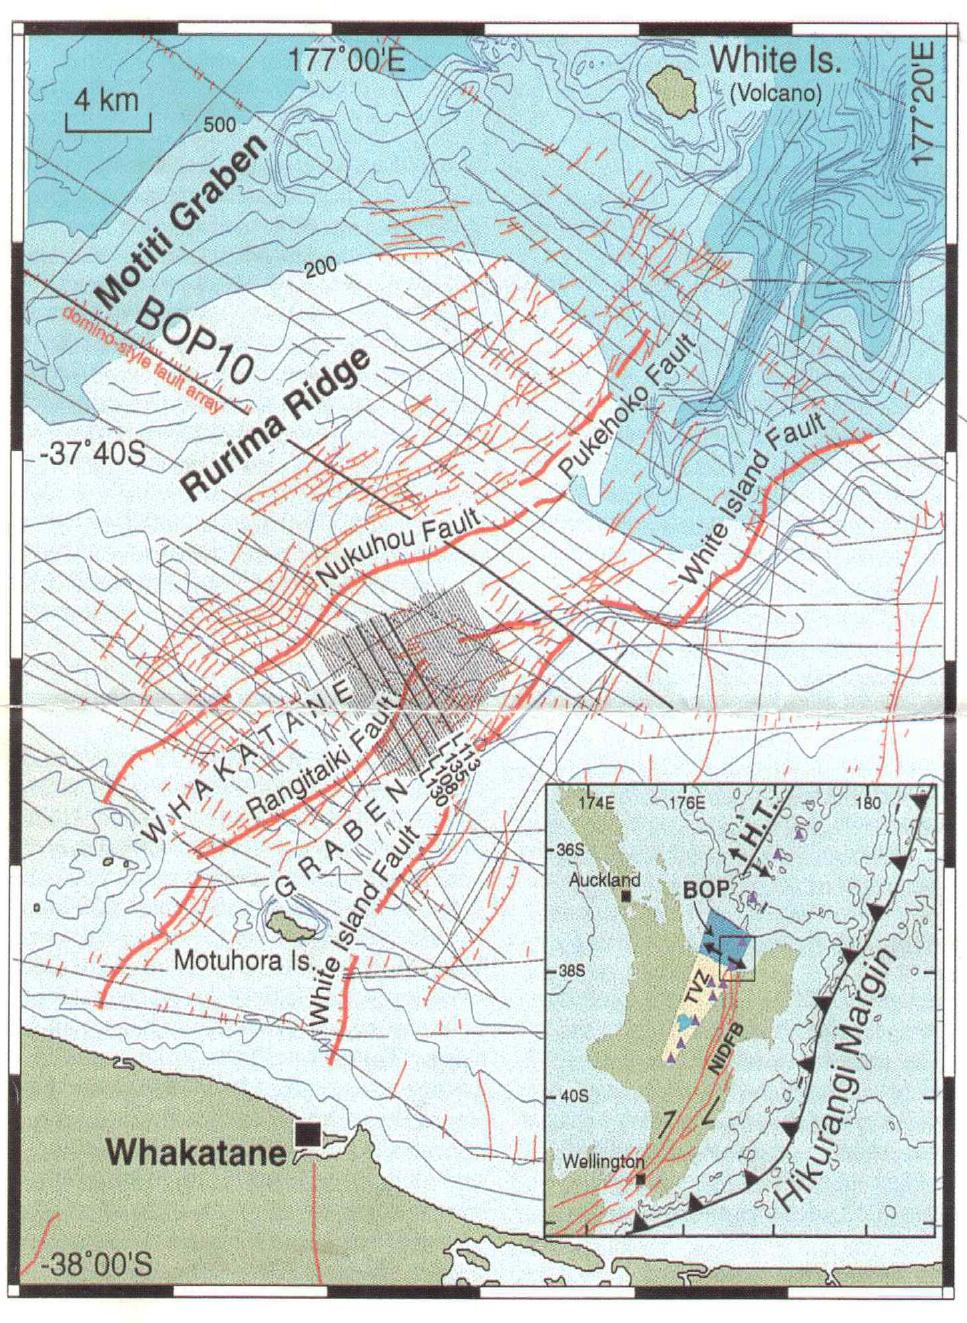 Interpretation map of the Whakatane Graben showing the major active faults and the positions of the multichannel seismic and 3.5 KHz profiles.